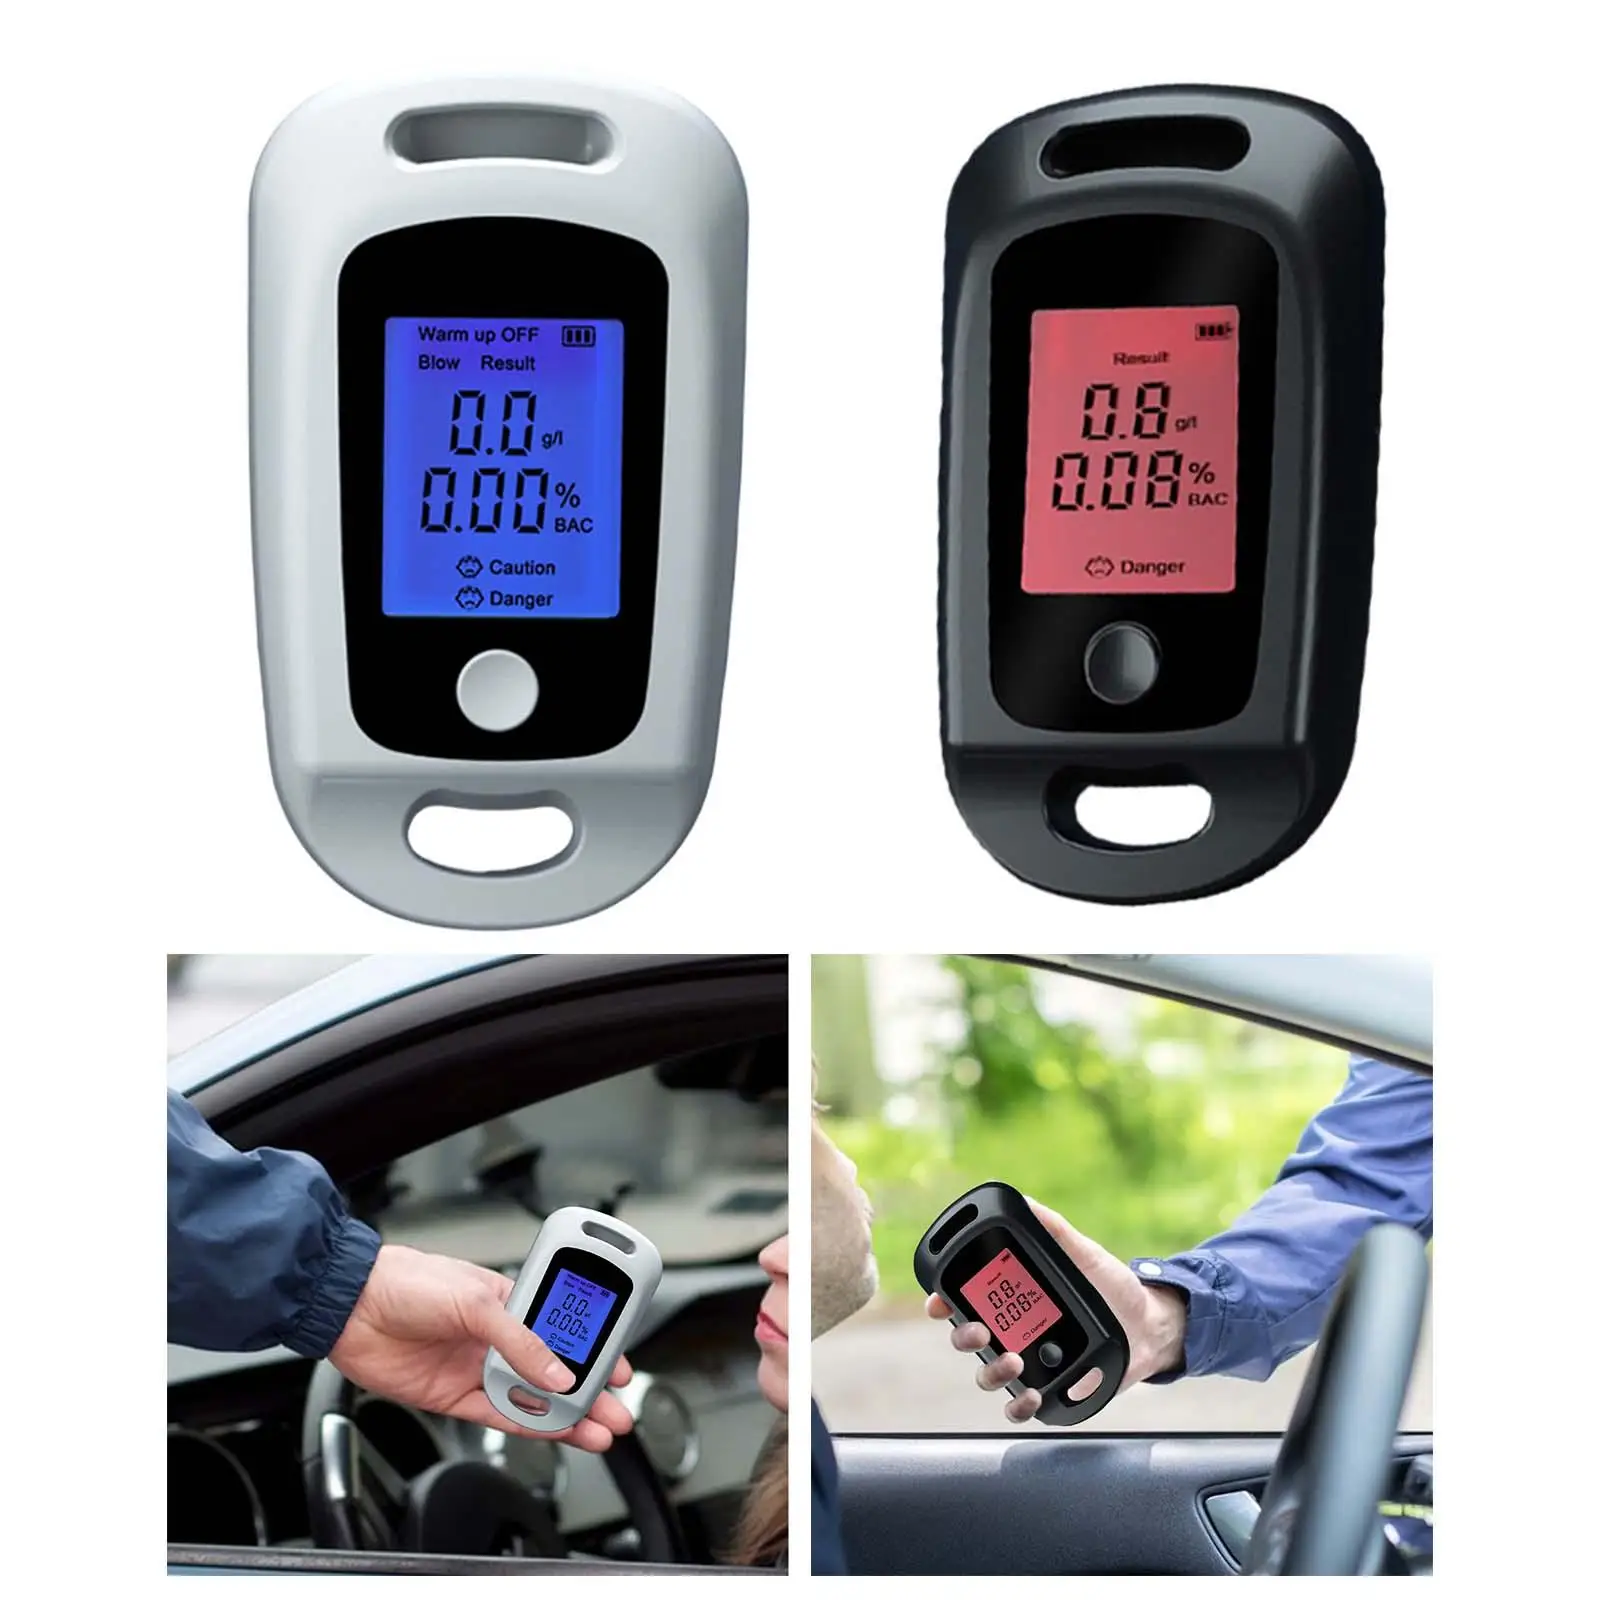 Alcohol Tester High Accuracy LCD Display Screen Breath Drunk Driving Analyzer for Drivers